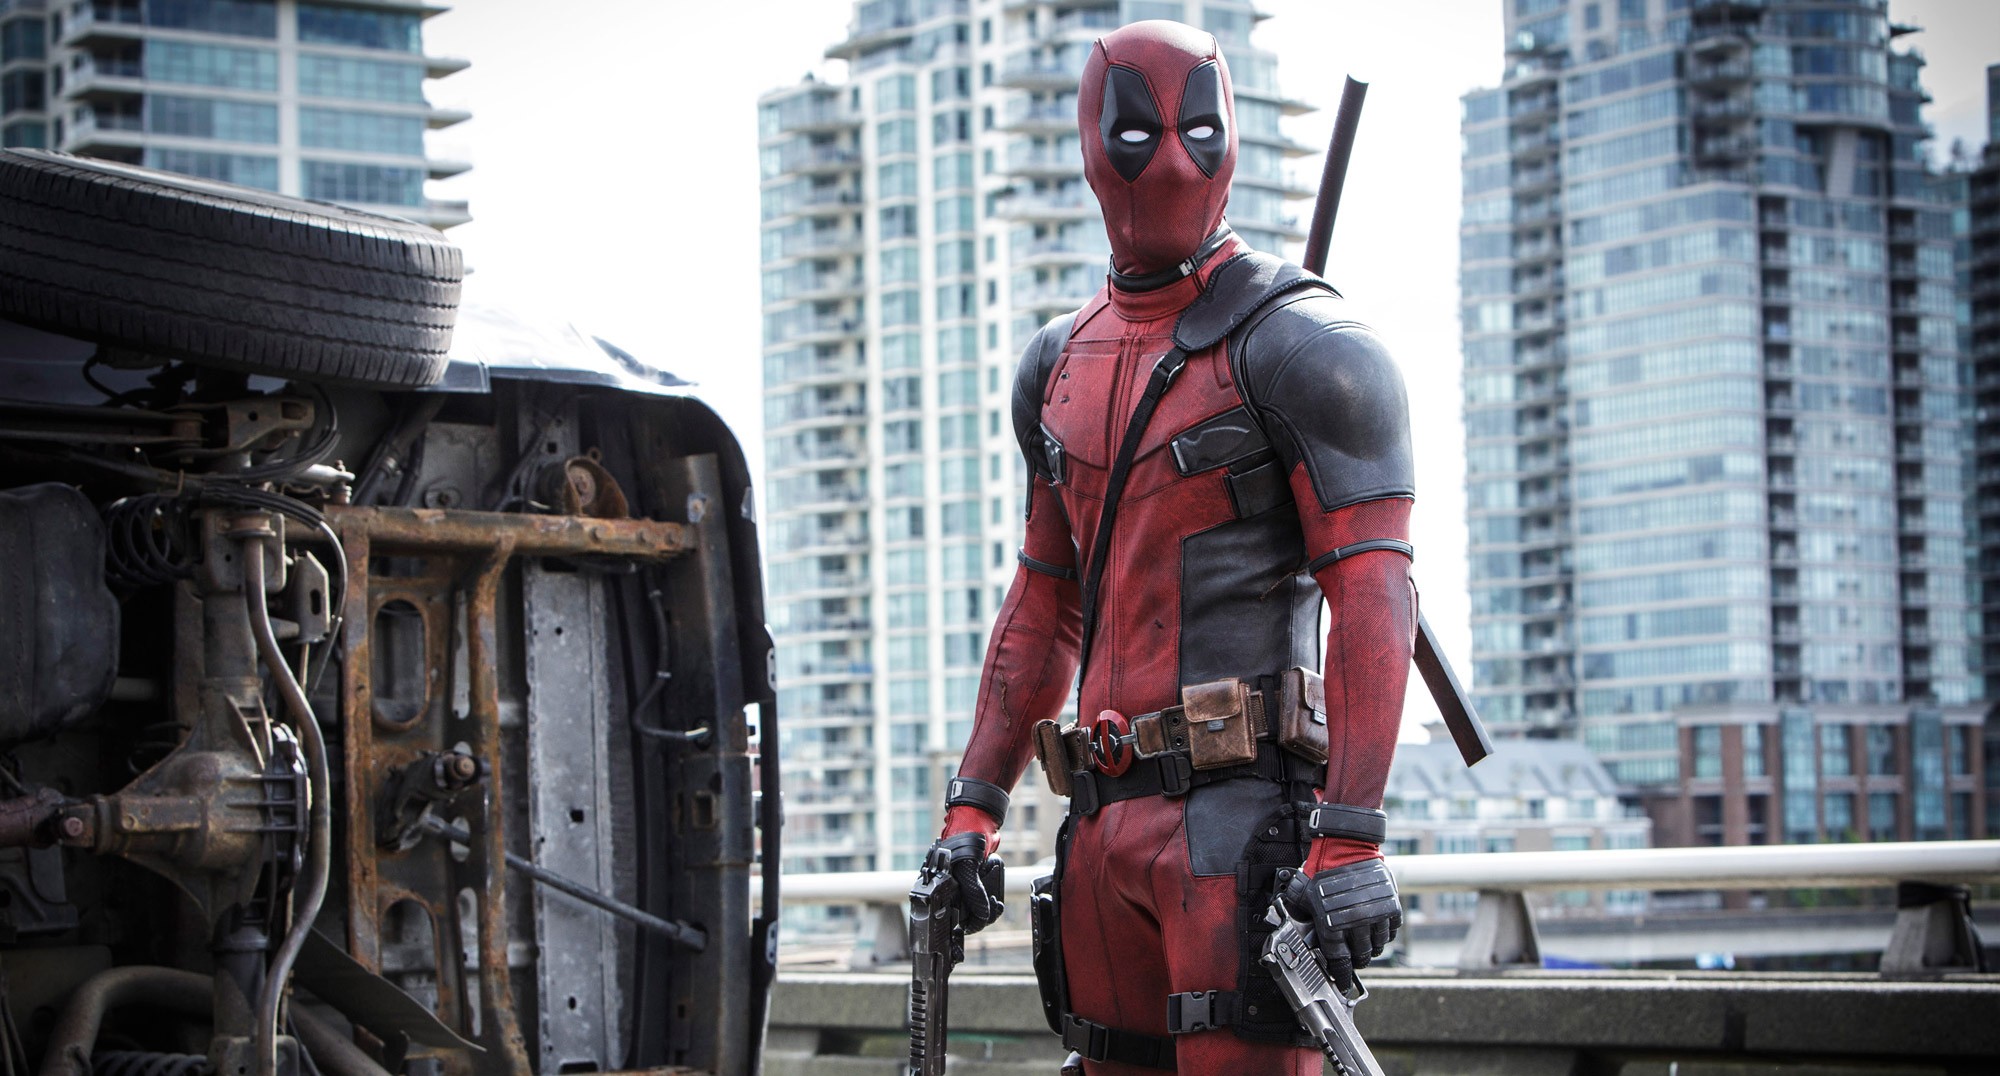 Deadpool 3 will introduce another beloved character into the MCU